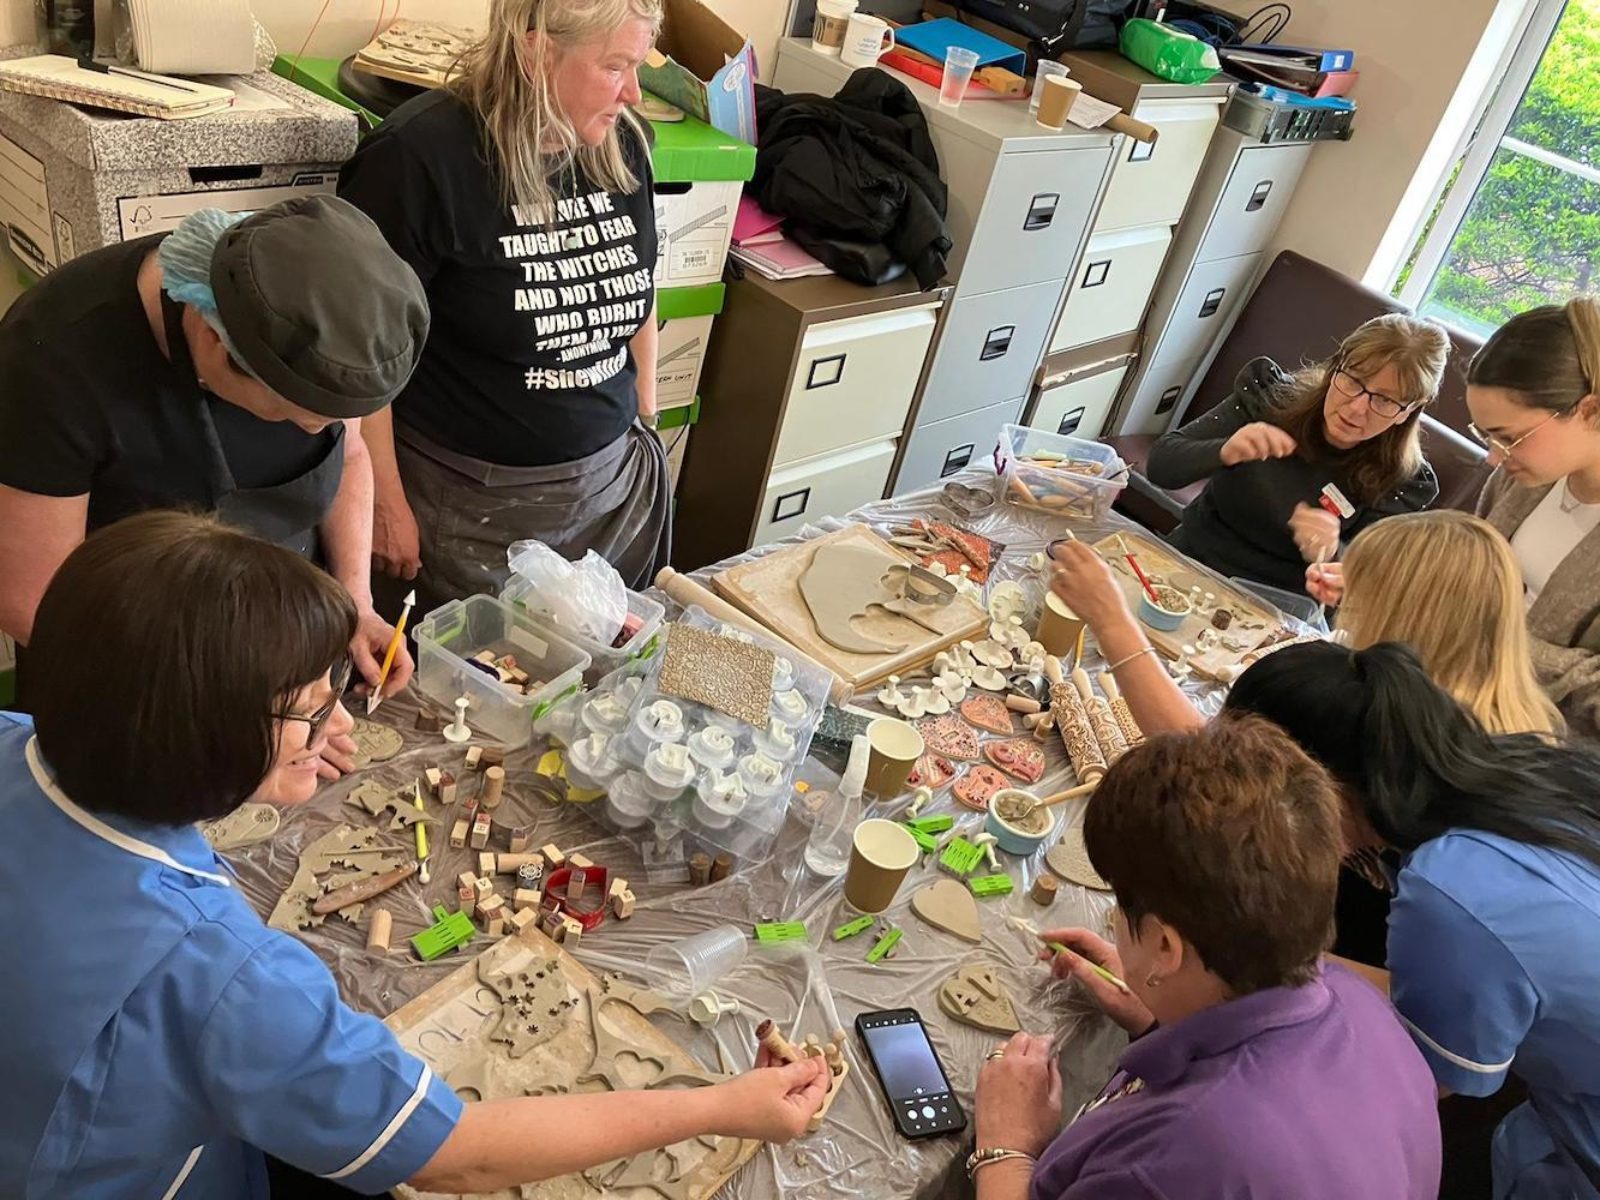 A group of adults around a table sculpting with clay